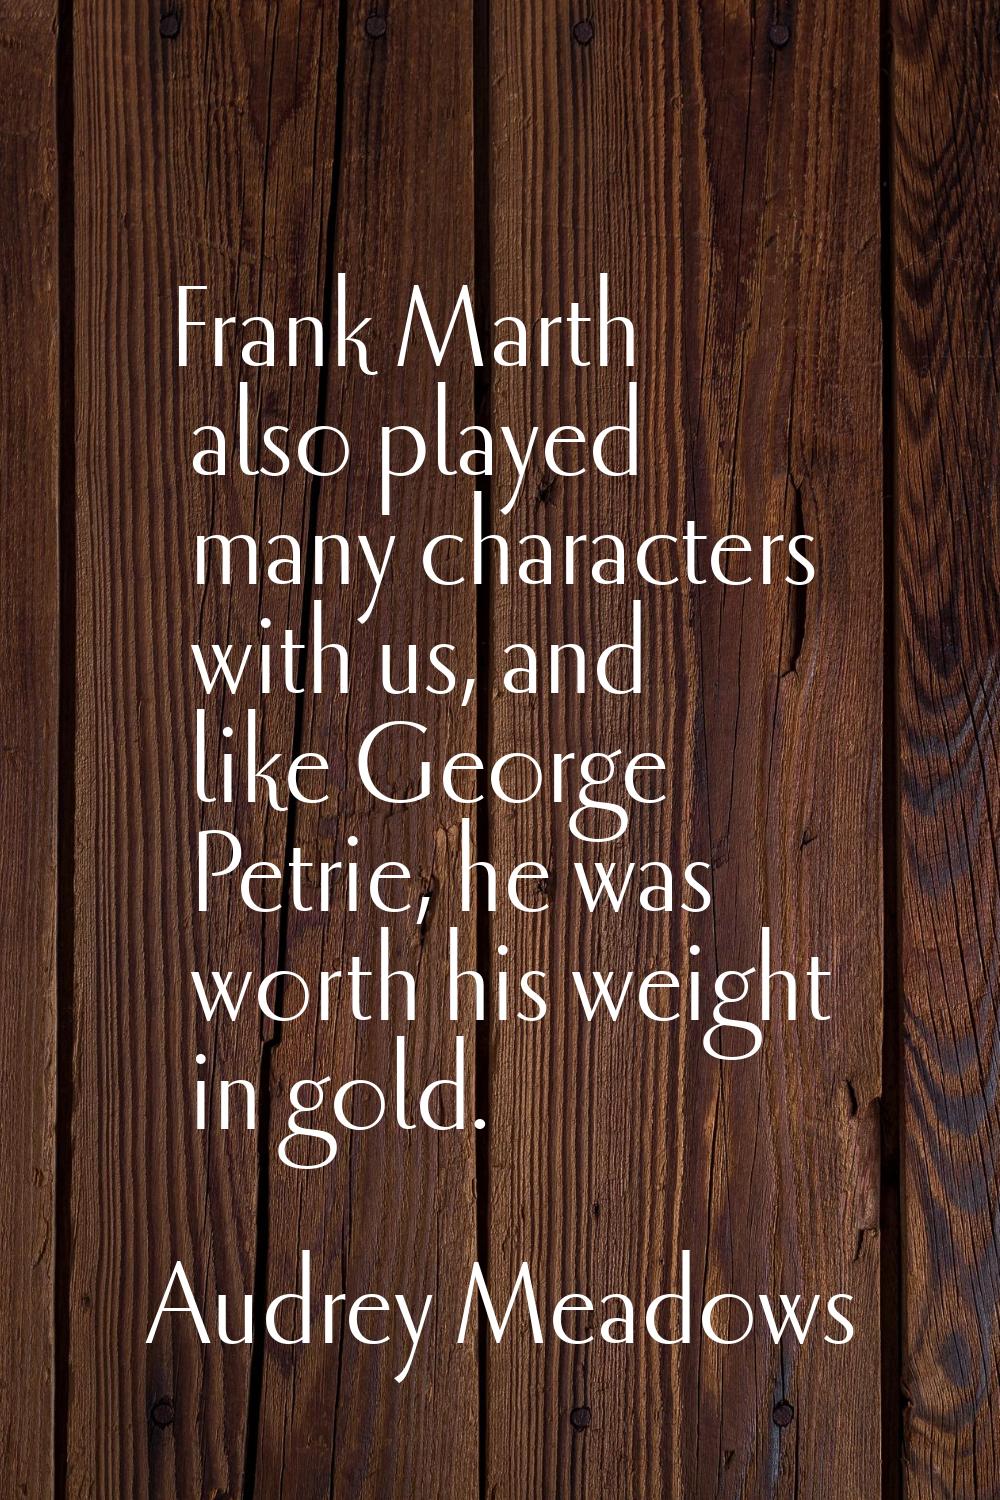 Frank Marth also played many characters with us, and like George Petrie, he was worth his weight in